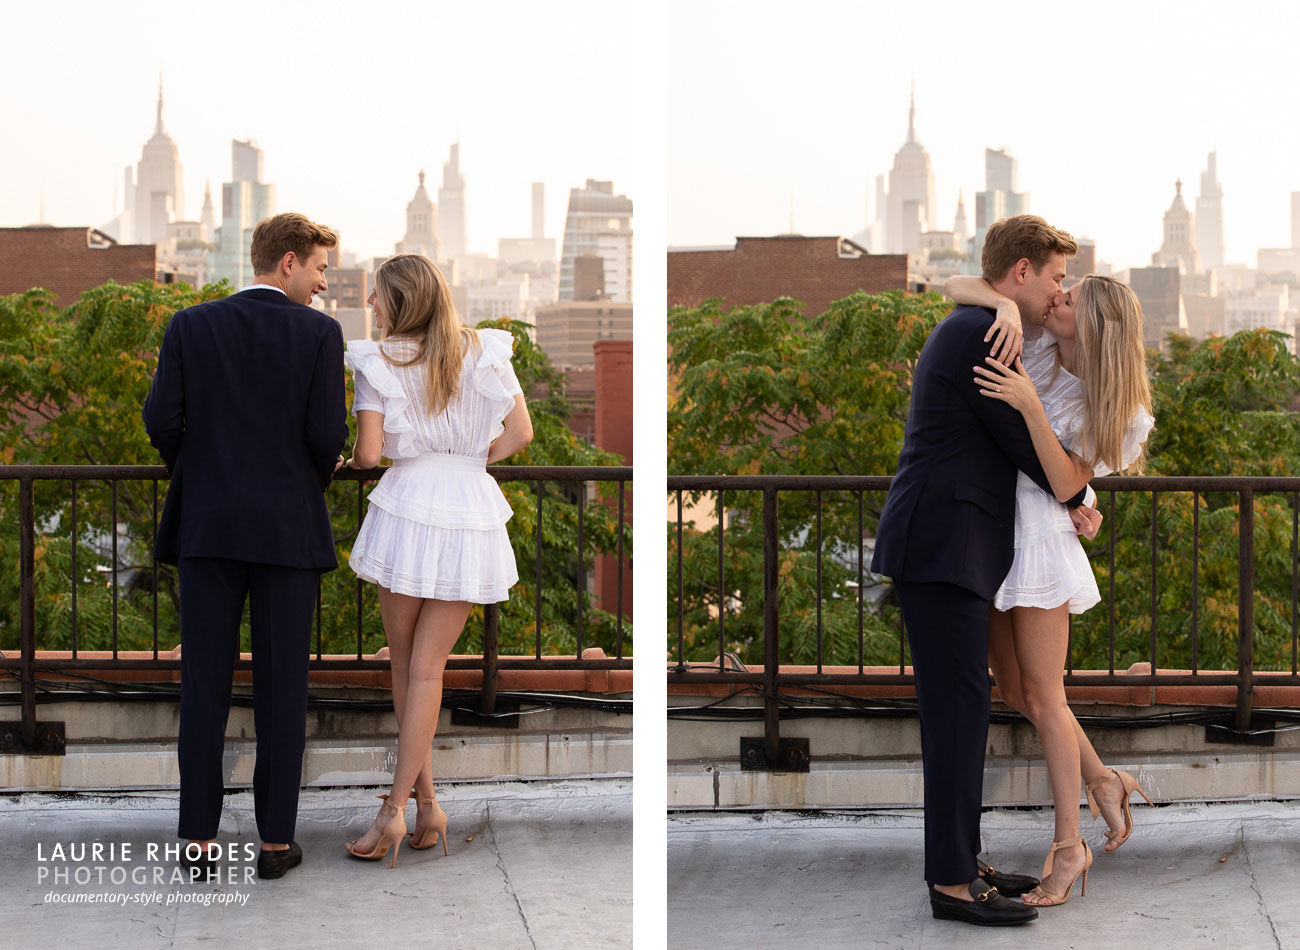 Engagement Photos by Laurie Rhodes | Emma and Richard Get Engaged 3